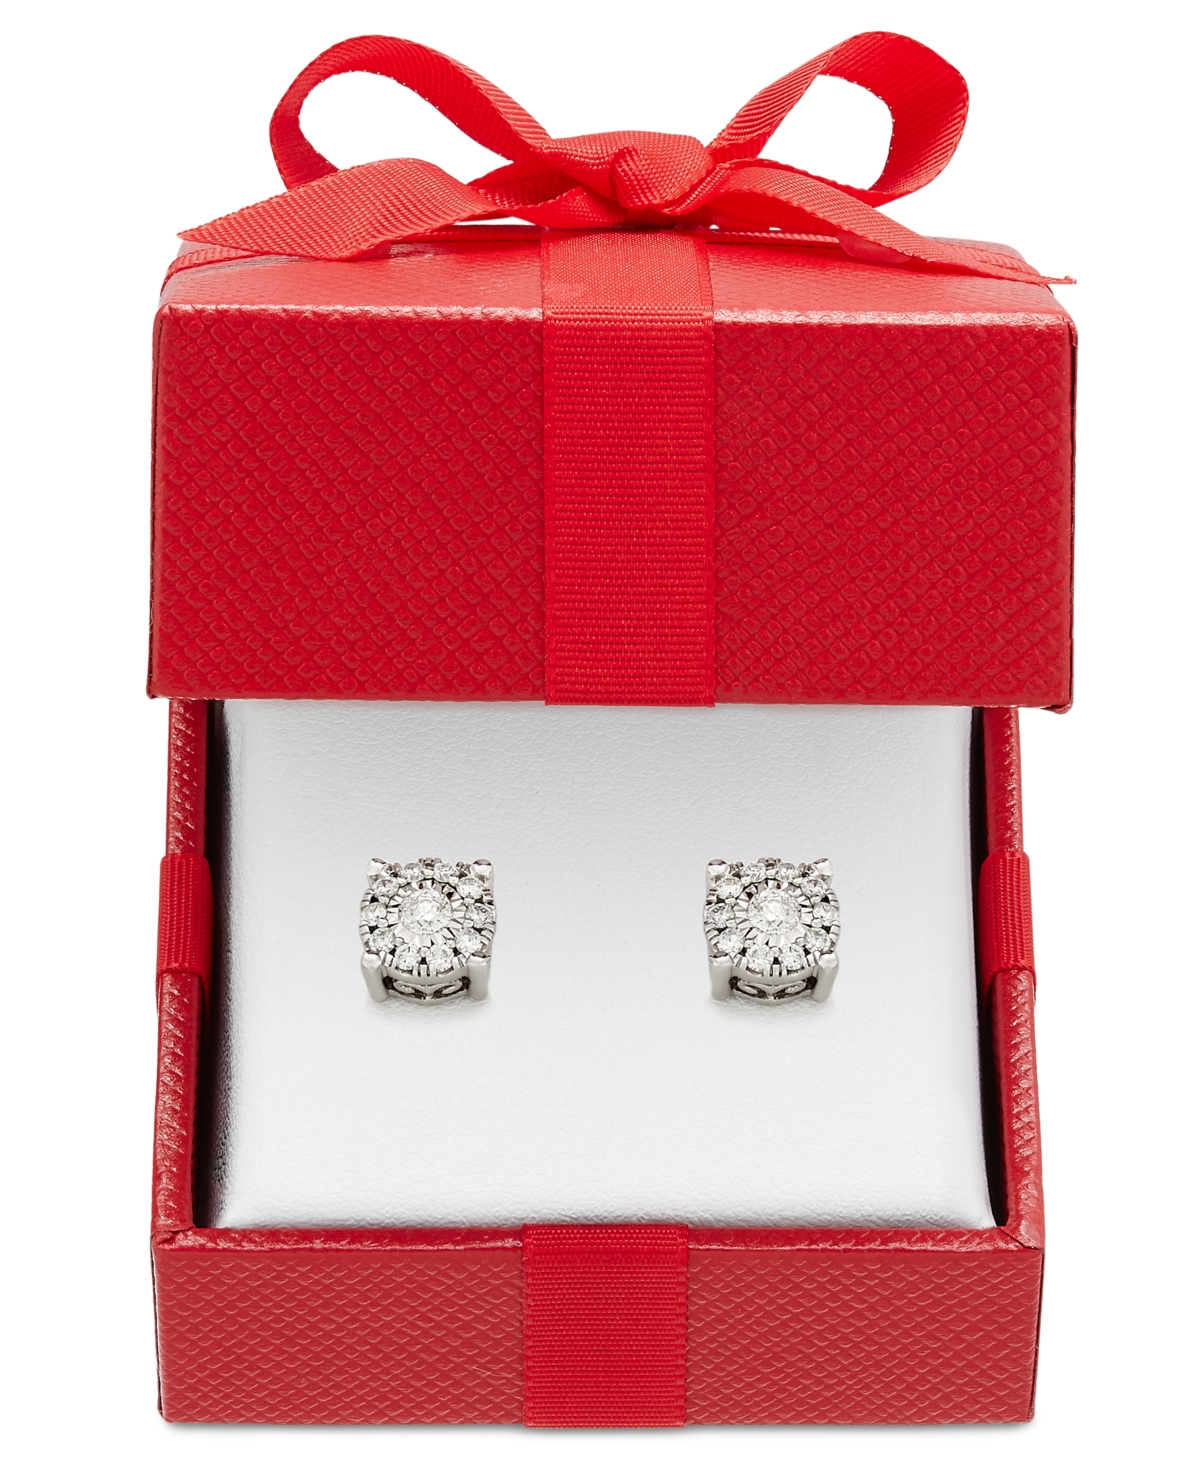 Macy's Diamond Stud Earrings (1/3 ct. t.w.) in 14K White, Yellow or Rose Gold  $299.00 + Free Shipping